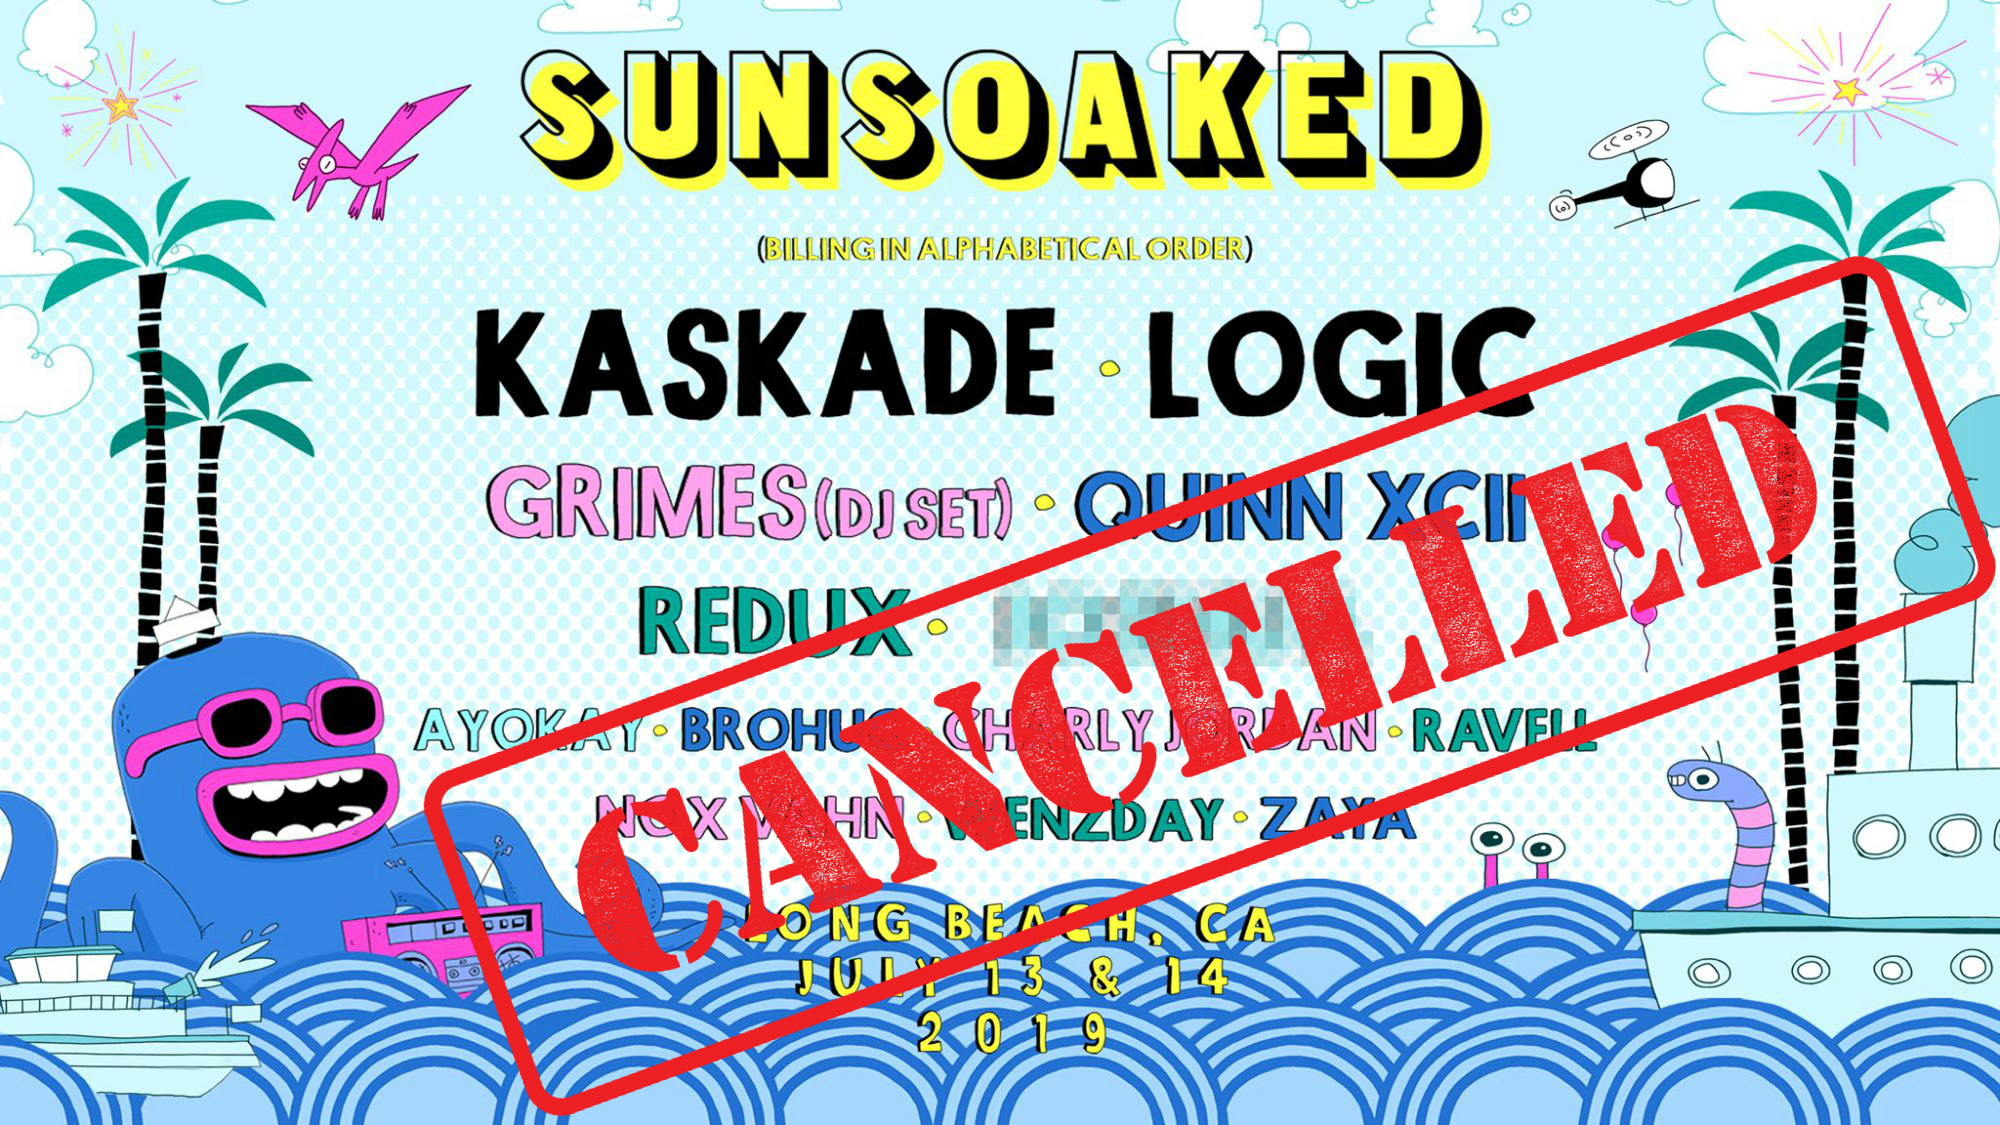 Sun Soaked 2019 Cancelled